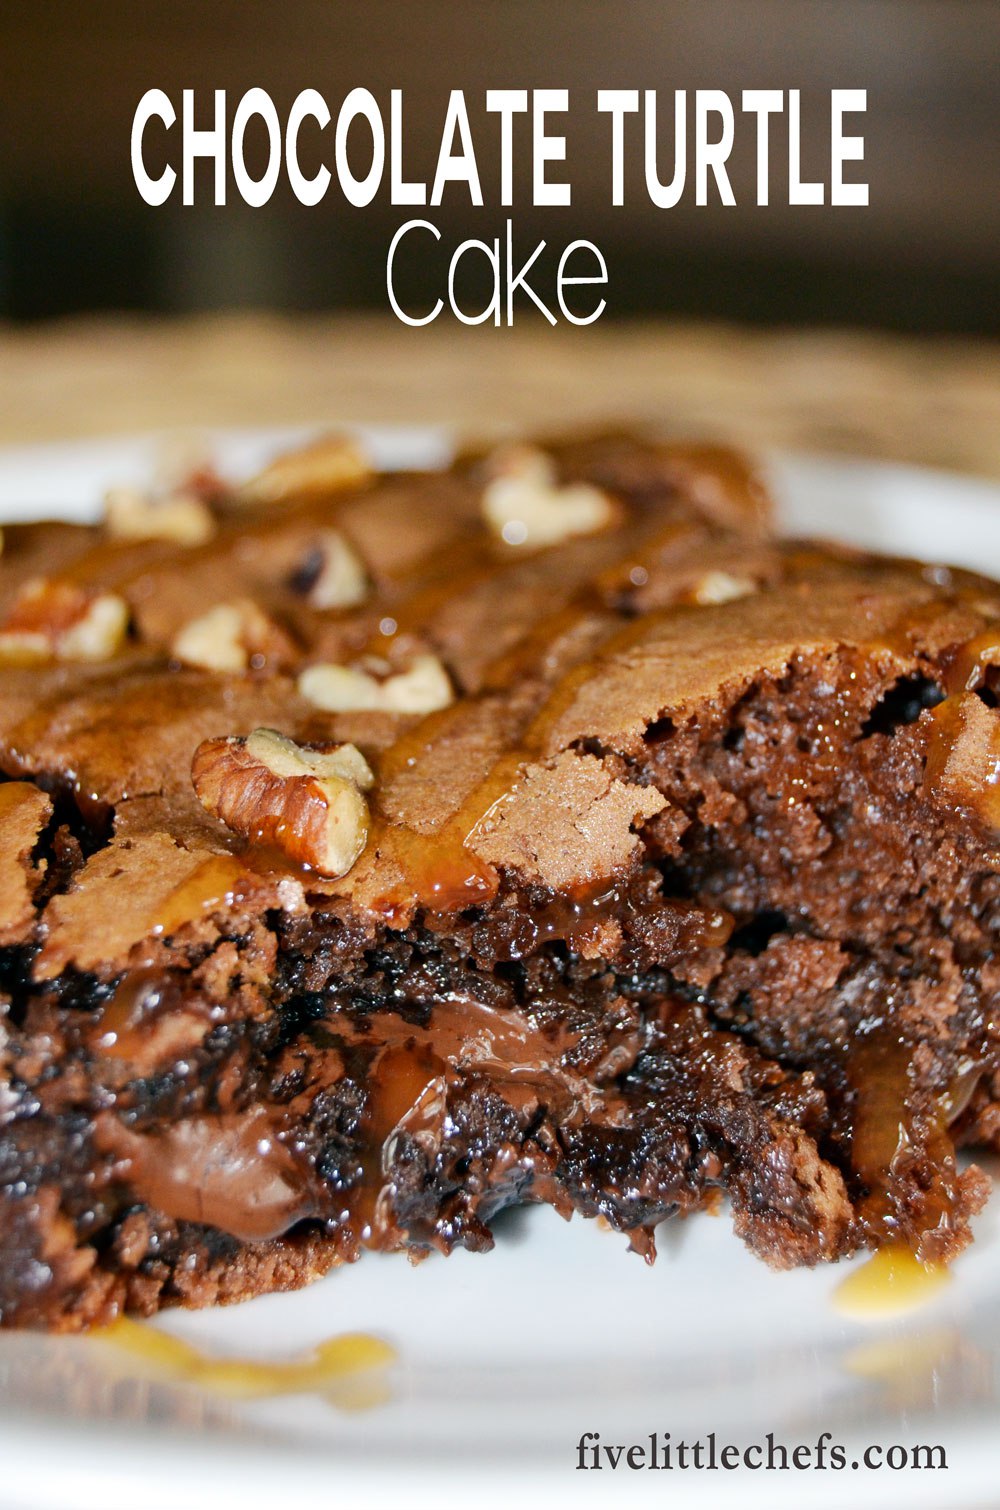 Chocolate Turtle Cake is an easy recipe. Use a german chocolate cake mix then add in some chocolate chips and caramel.